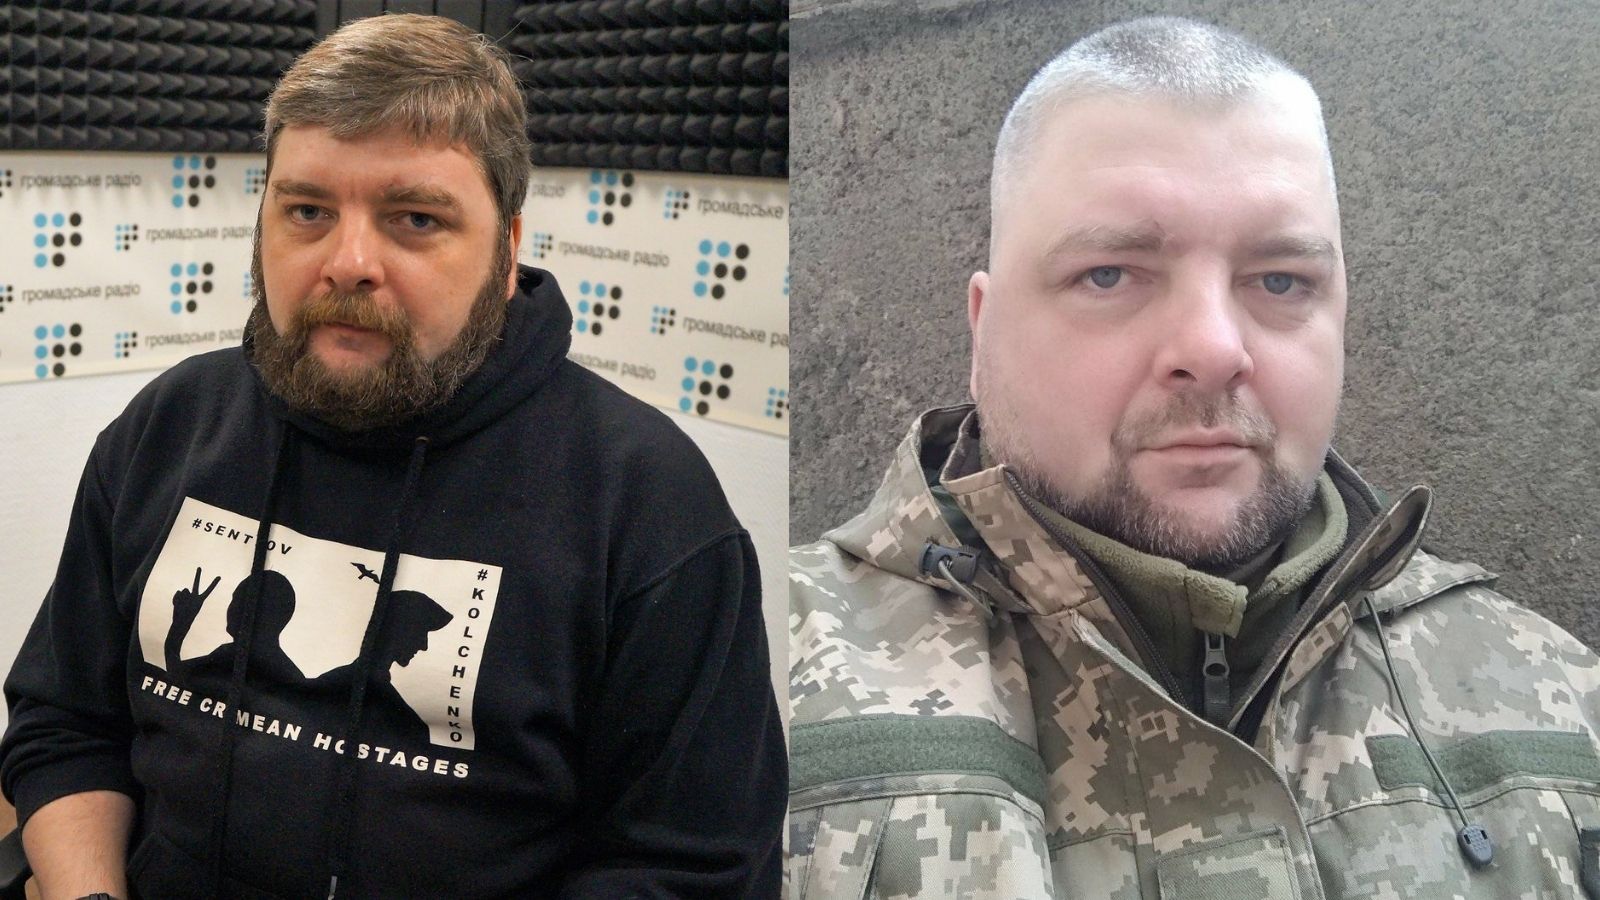 Update: Hromadske Radio raised enough money for an infrared camera for Armed Forces, where journalist Maksym Butkevych serves